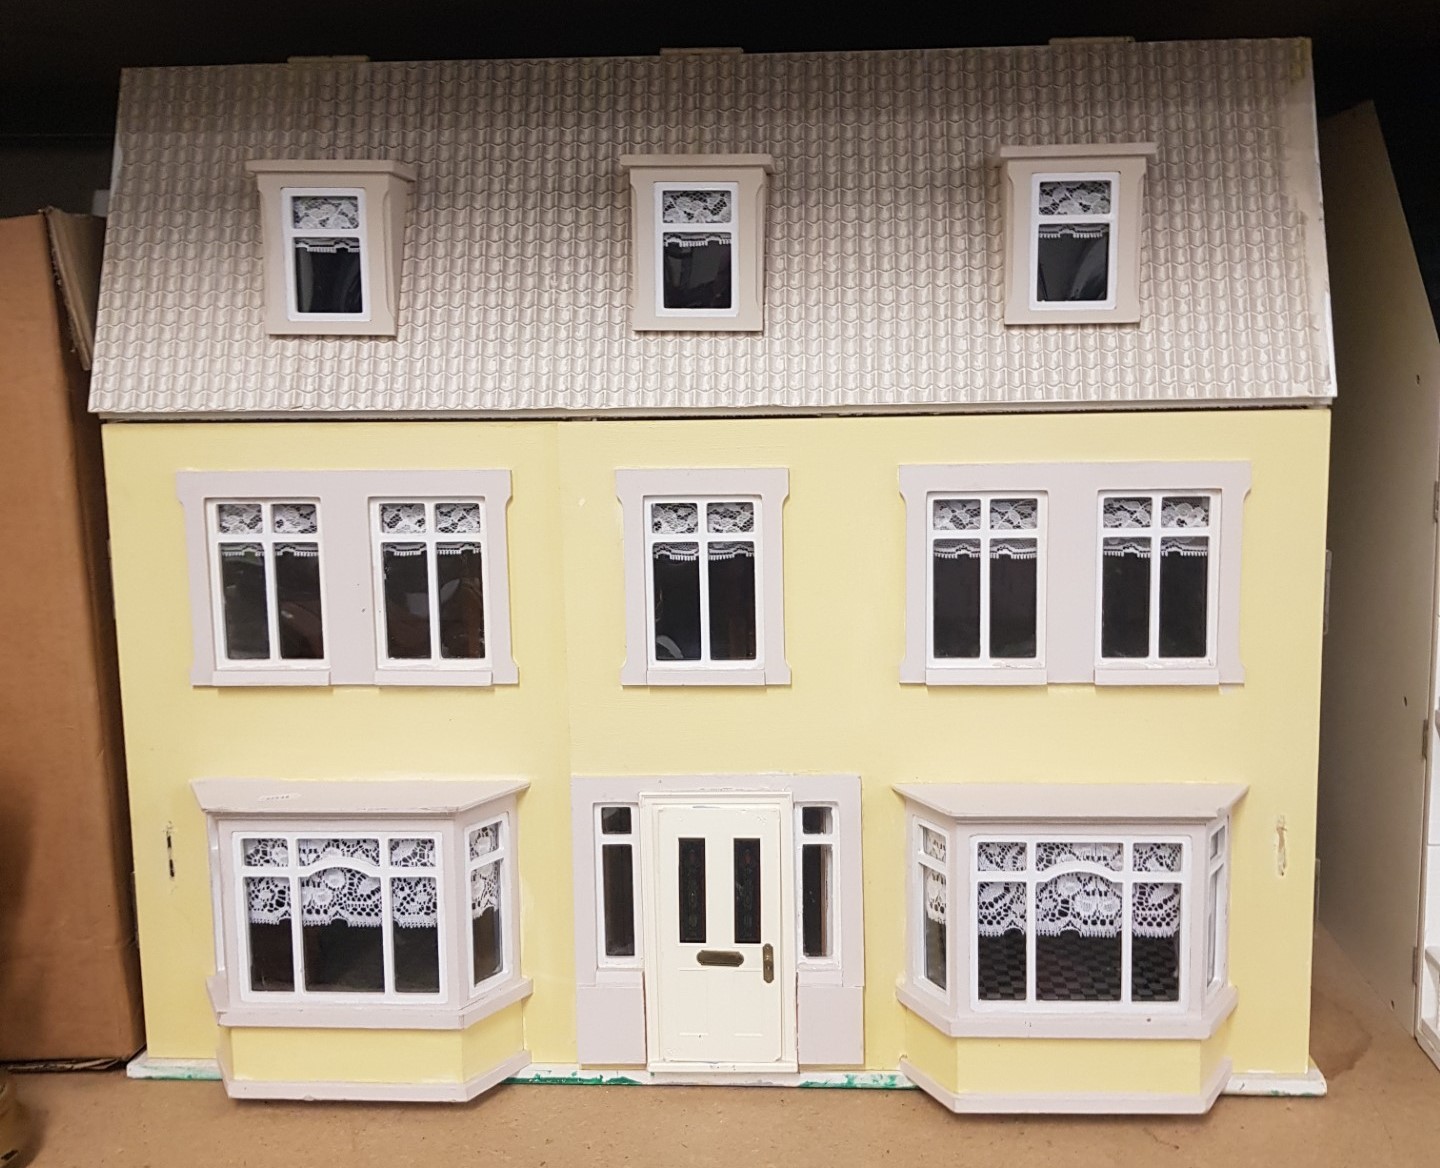 Large 3 story dolls house in yellow, 76cm in width.